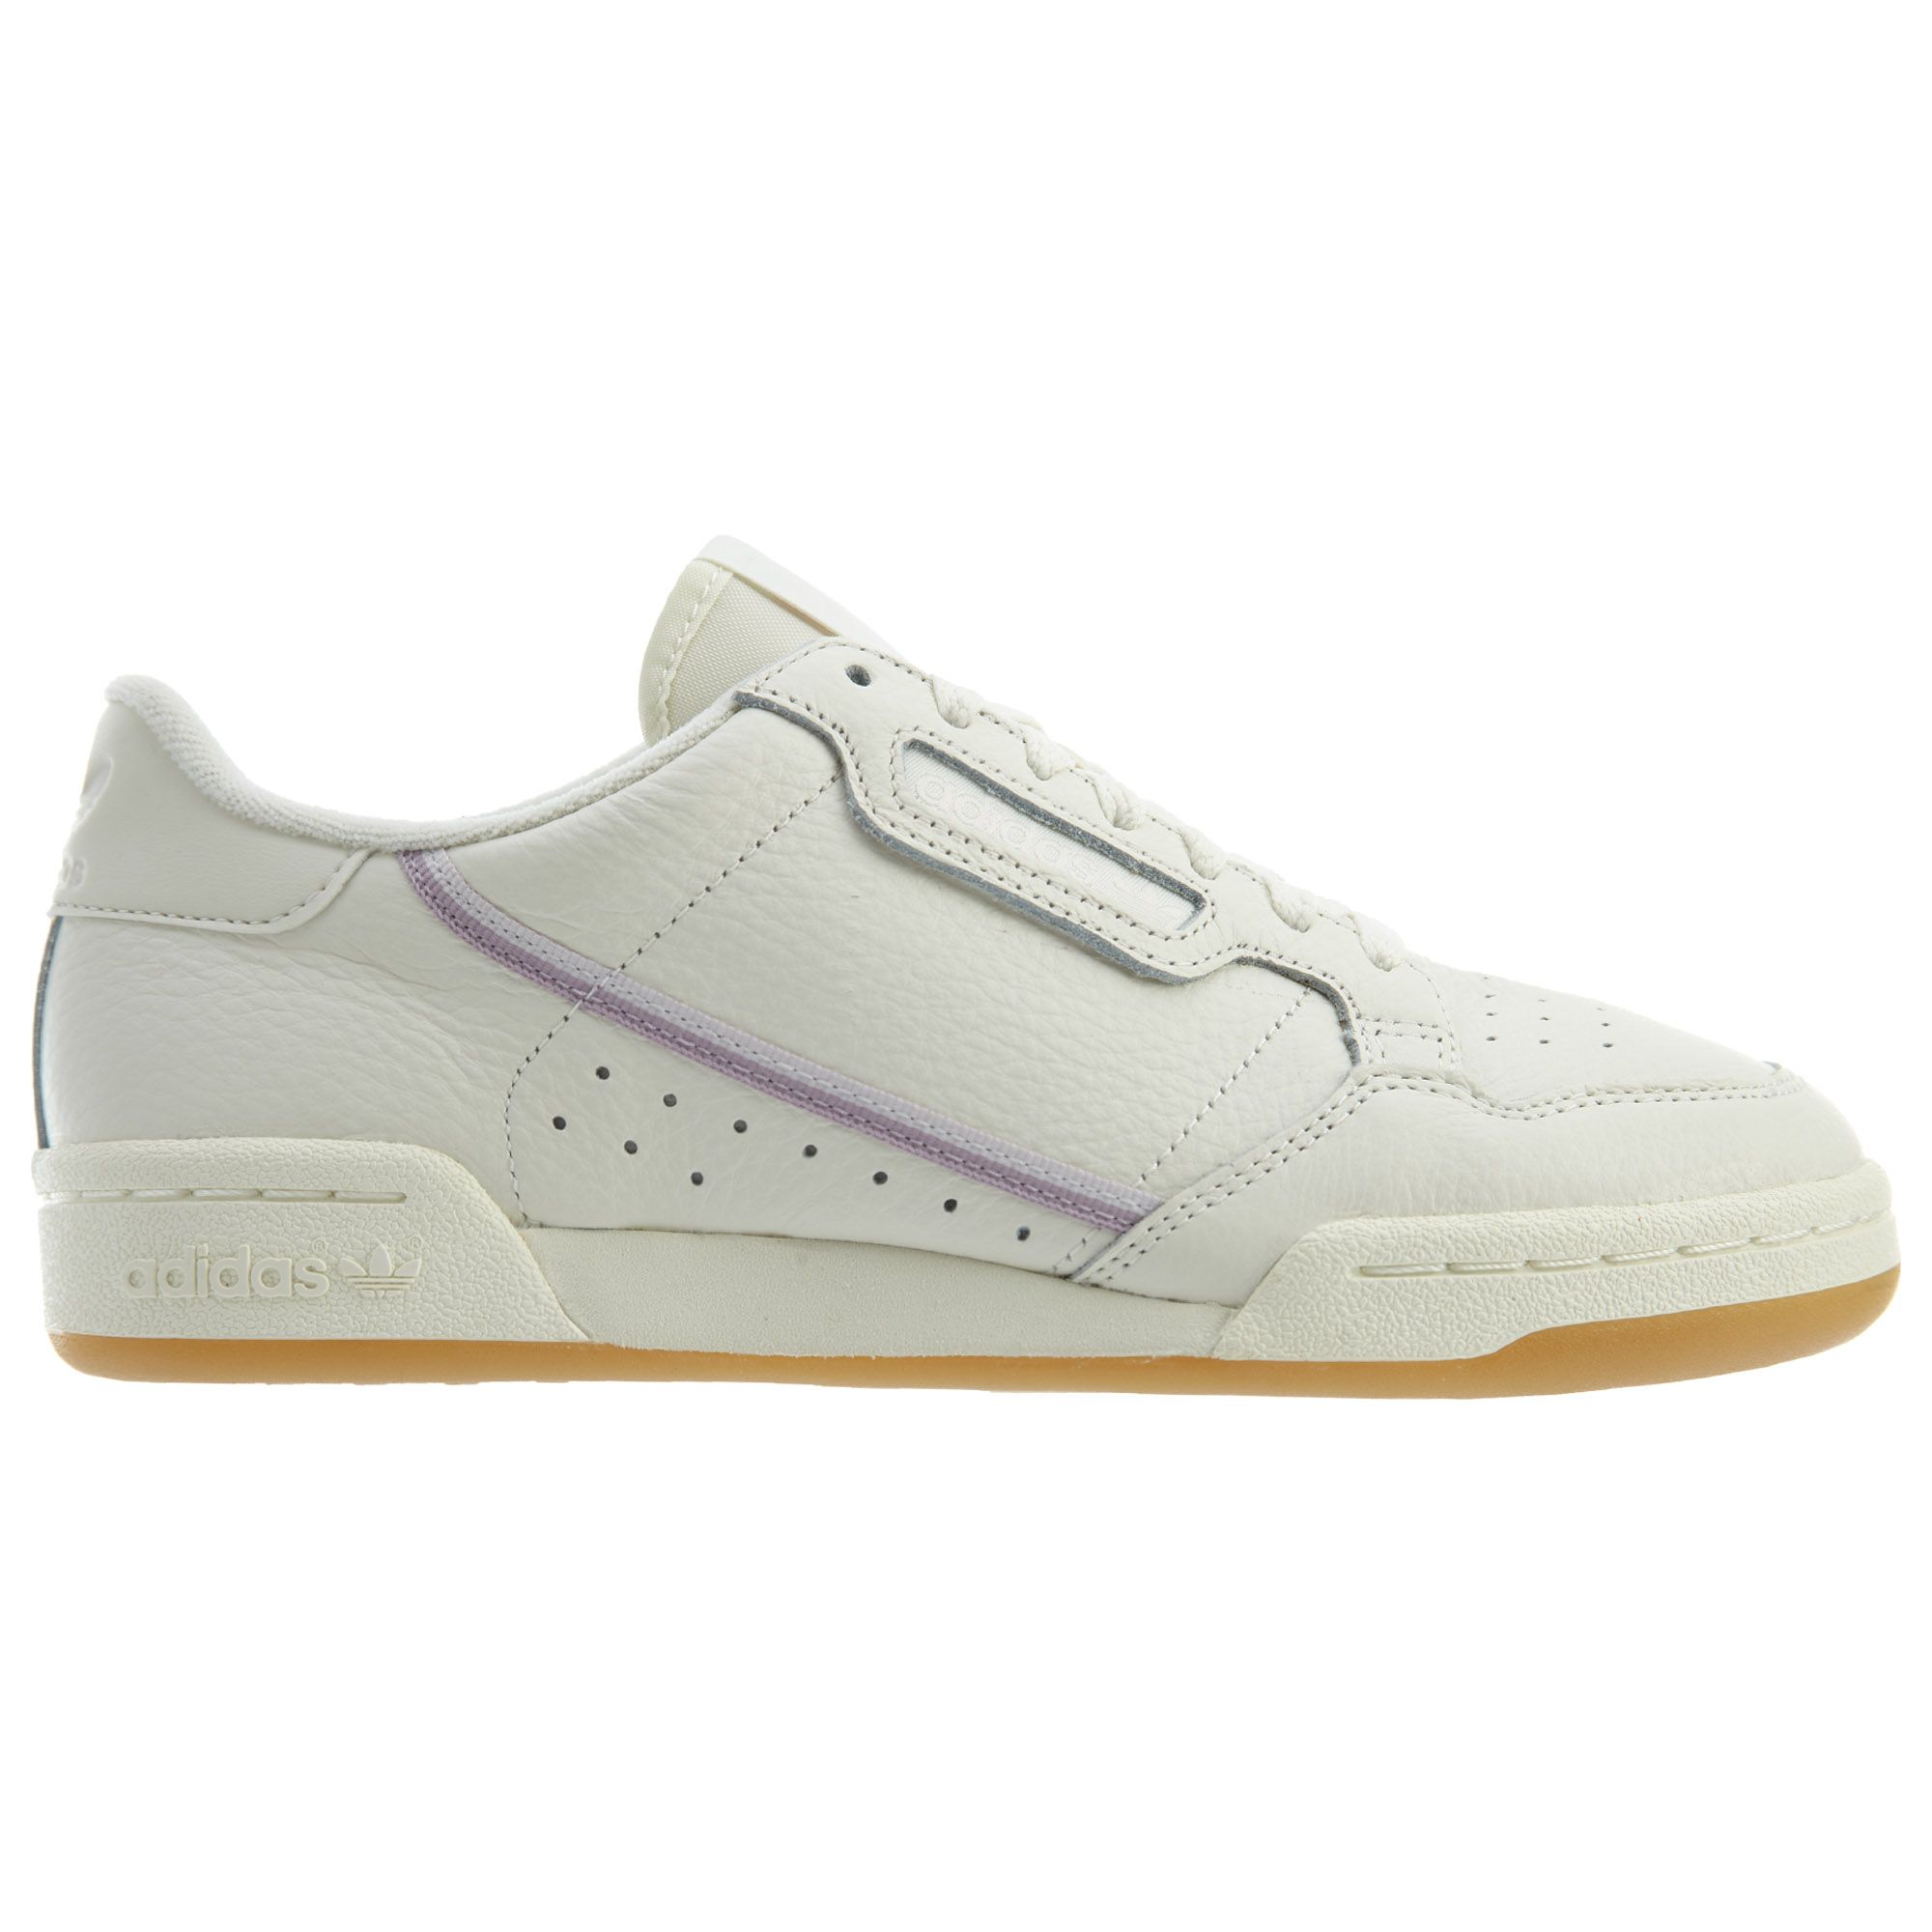 adidas continental orchid tint